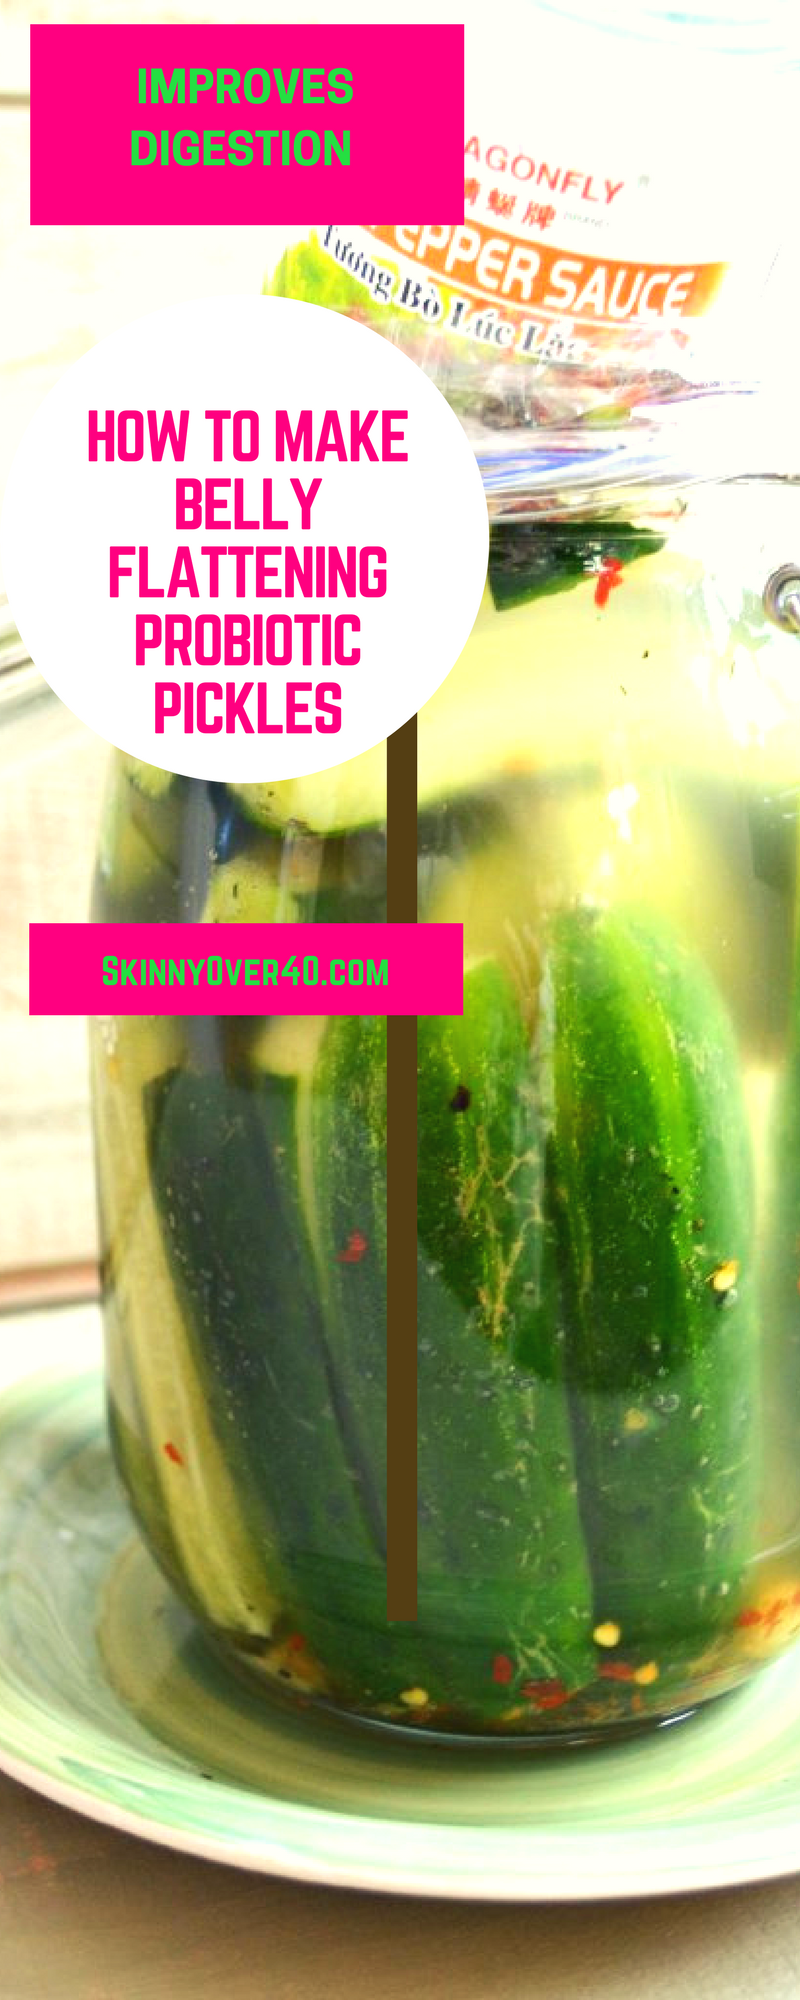 How to make homemade Probiotic Horseradish half sour pickles. Eating Probiotic Fermented foods will help you lose weight, flatten your belly and help with digestion.